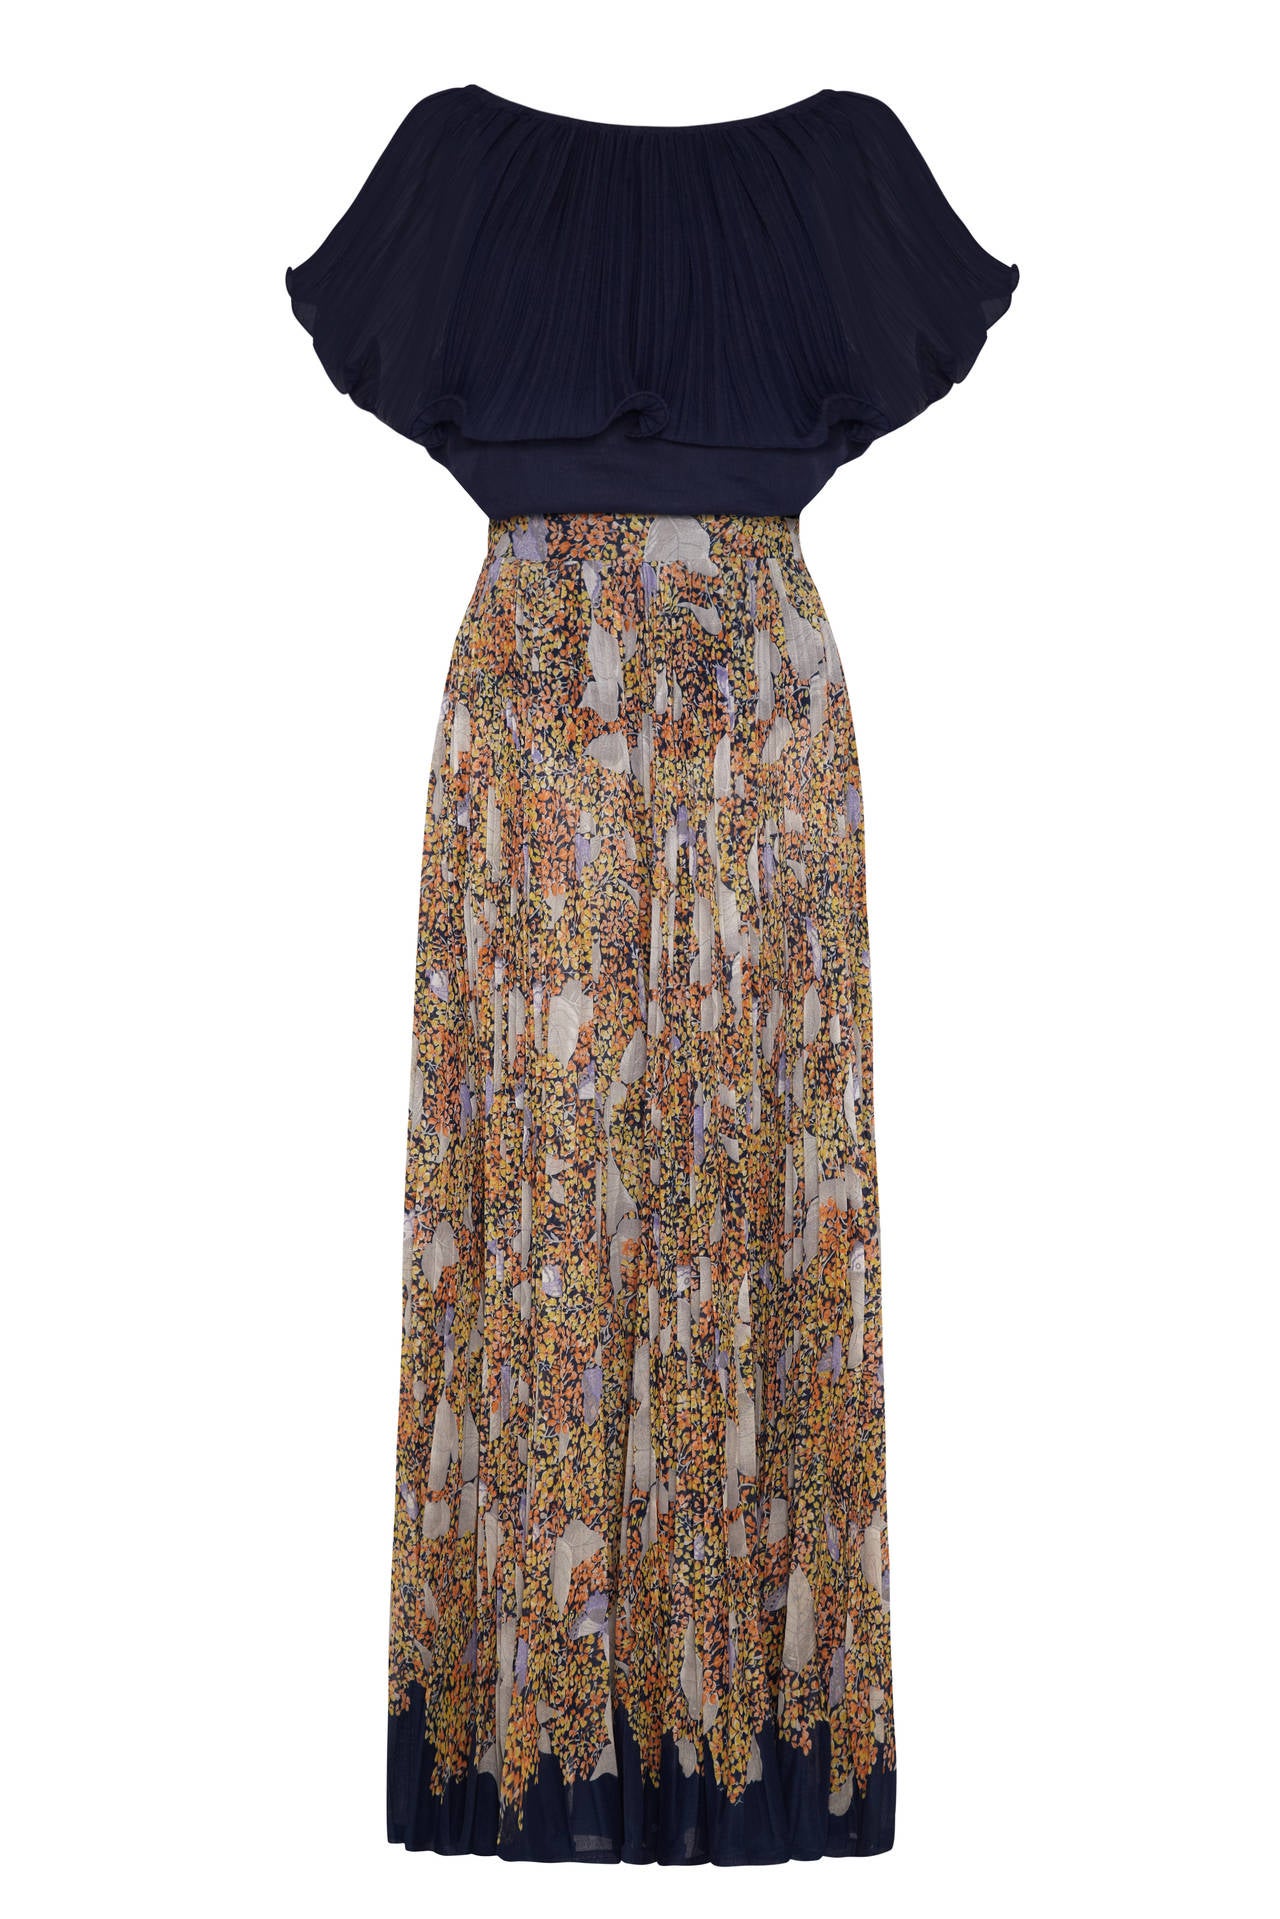 Black 1970s Elissa Pleated Cotton Maxi Skirt and Floral Top Set For Sale